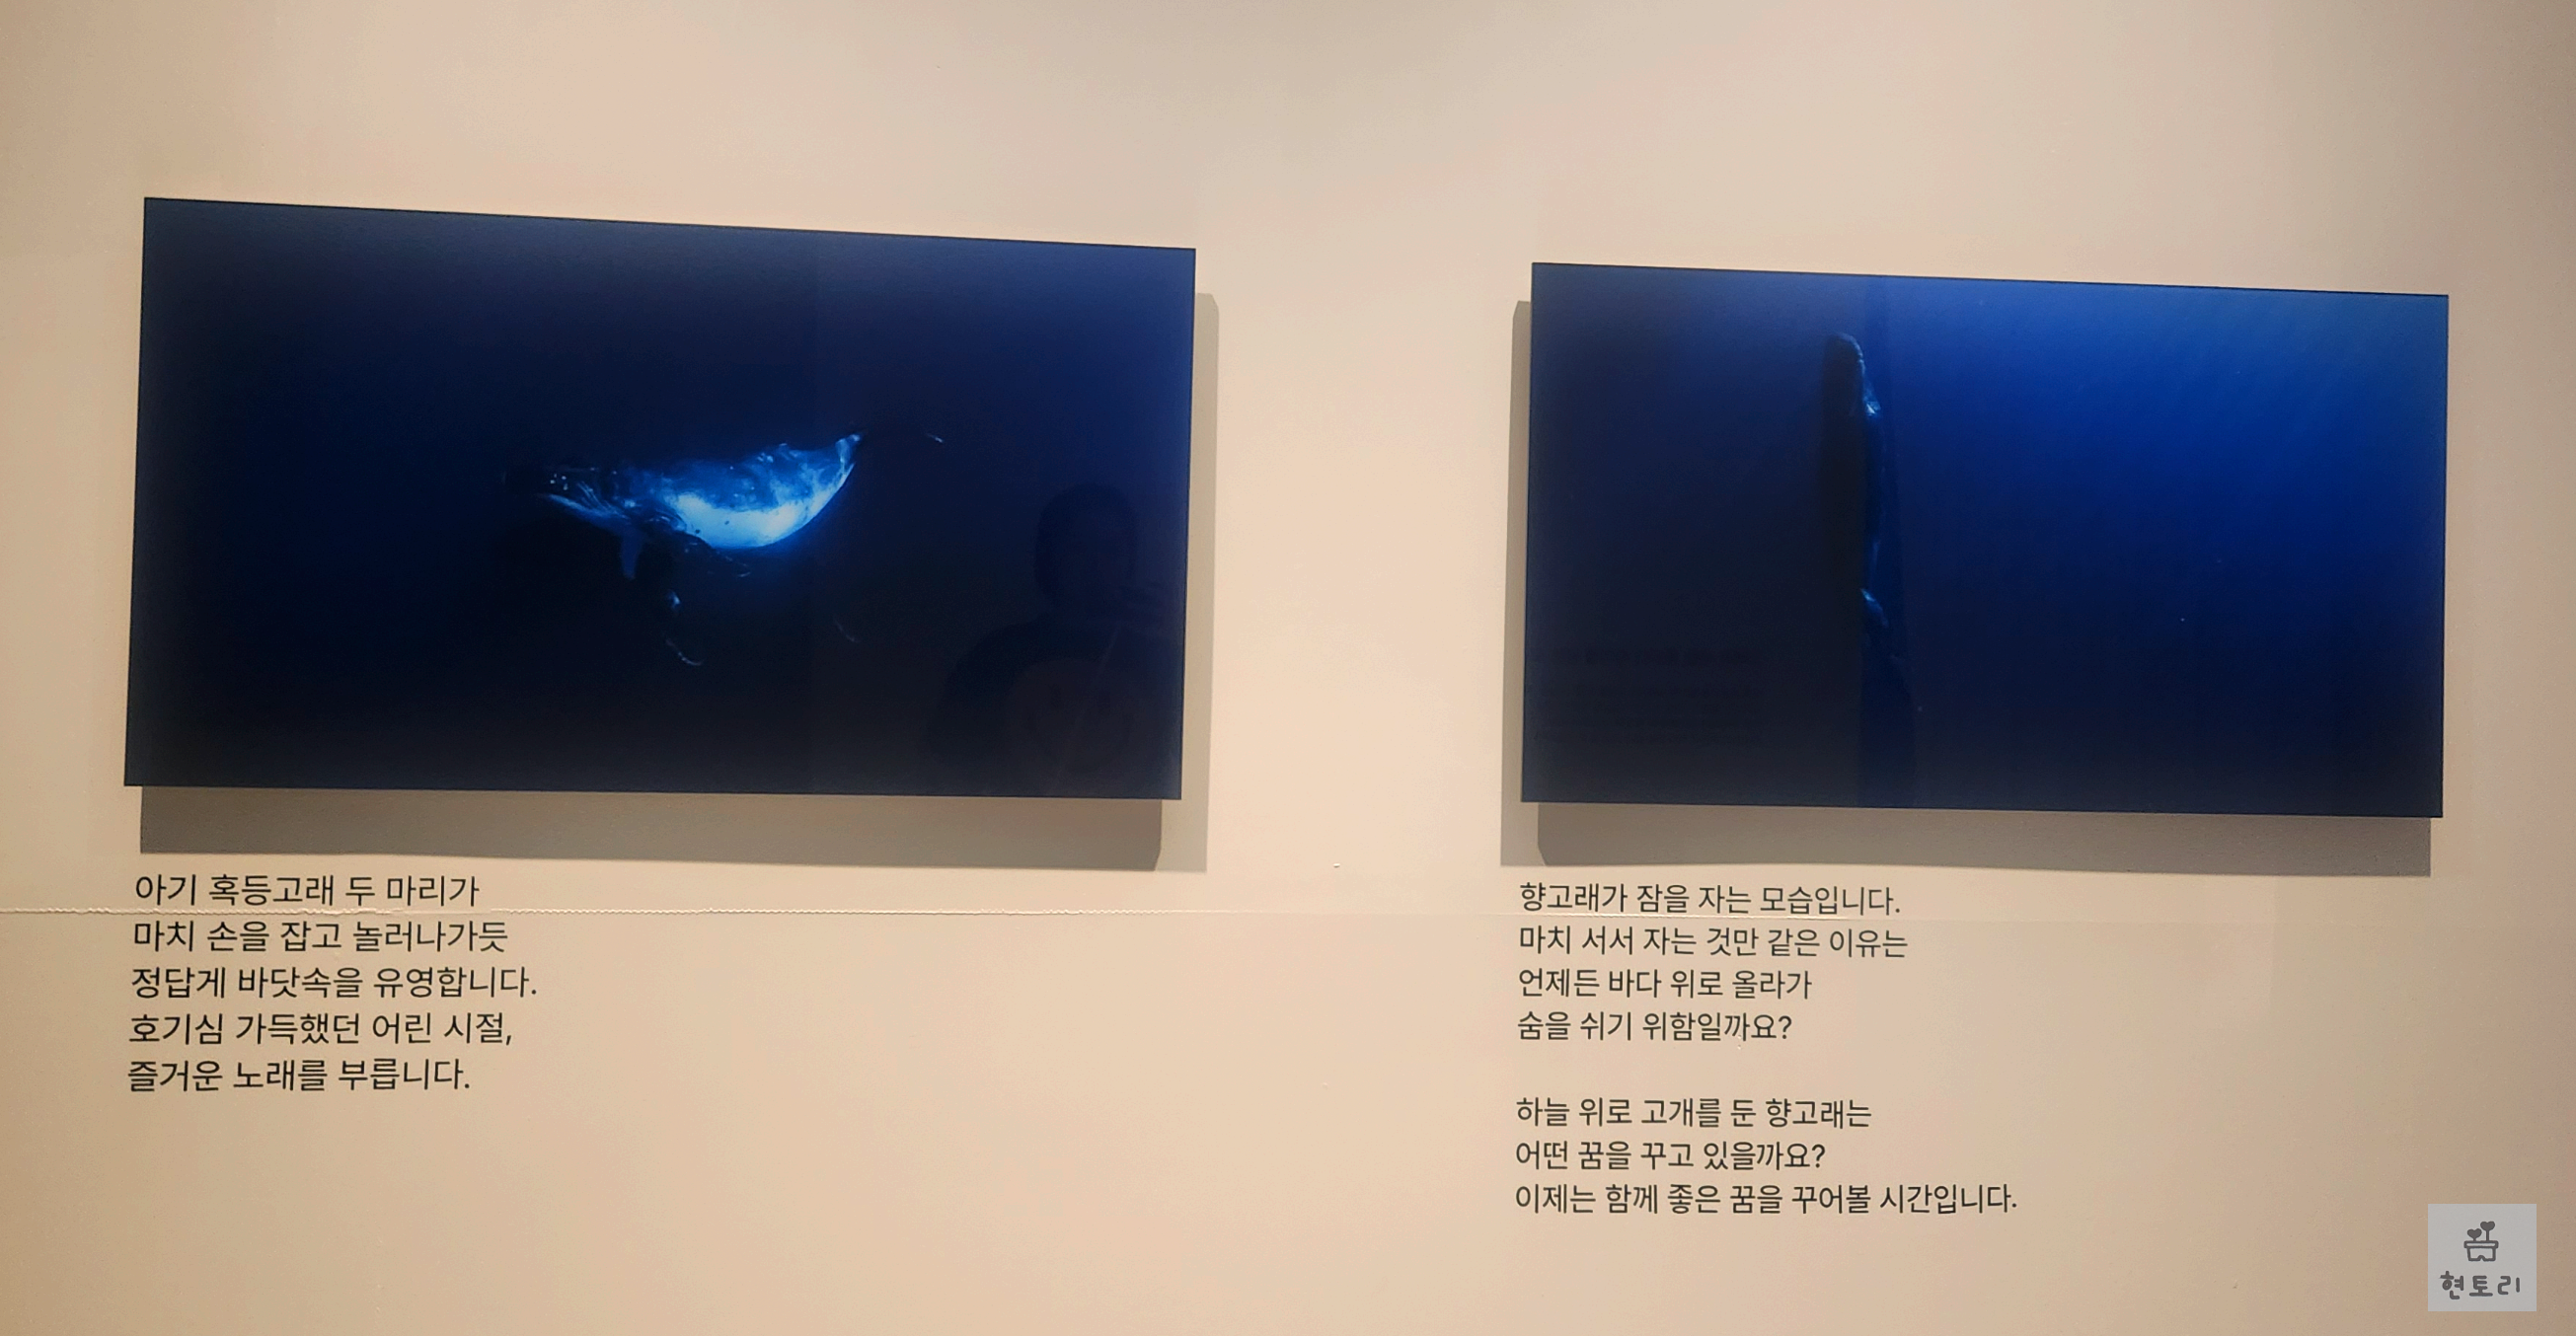 Whales and I: 고래와 나 전시